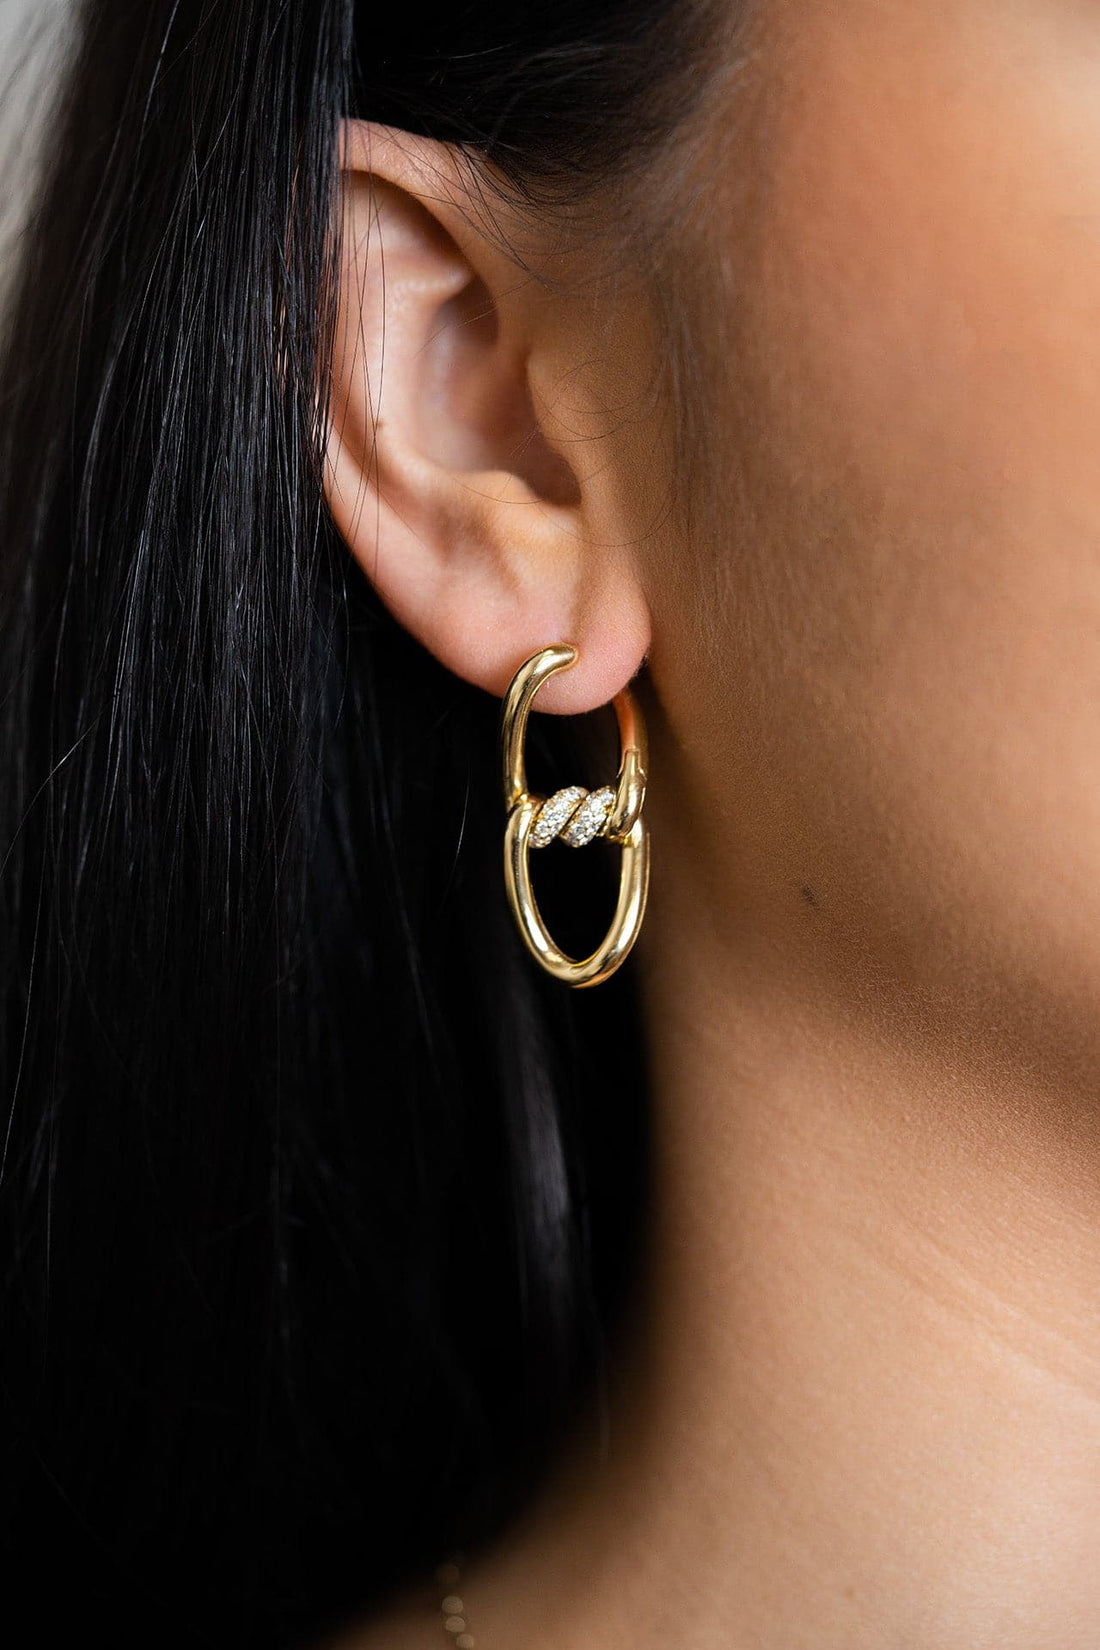 Roberto Coin Yellow Gold Cialoma Earrings - Skeie's Jewelers